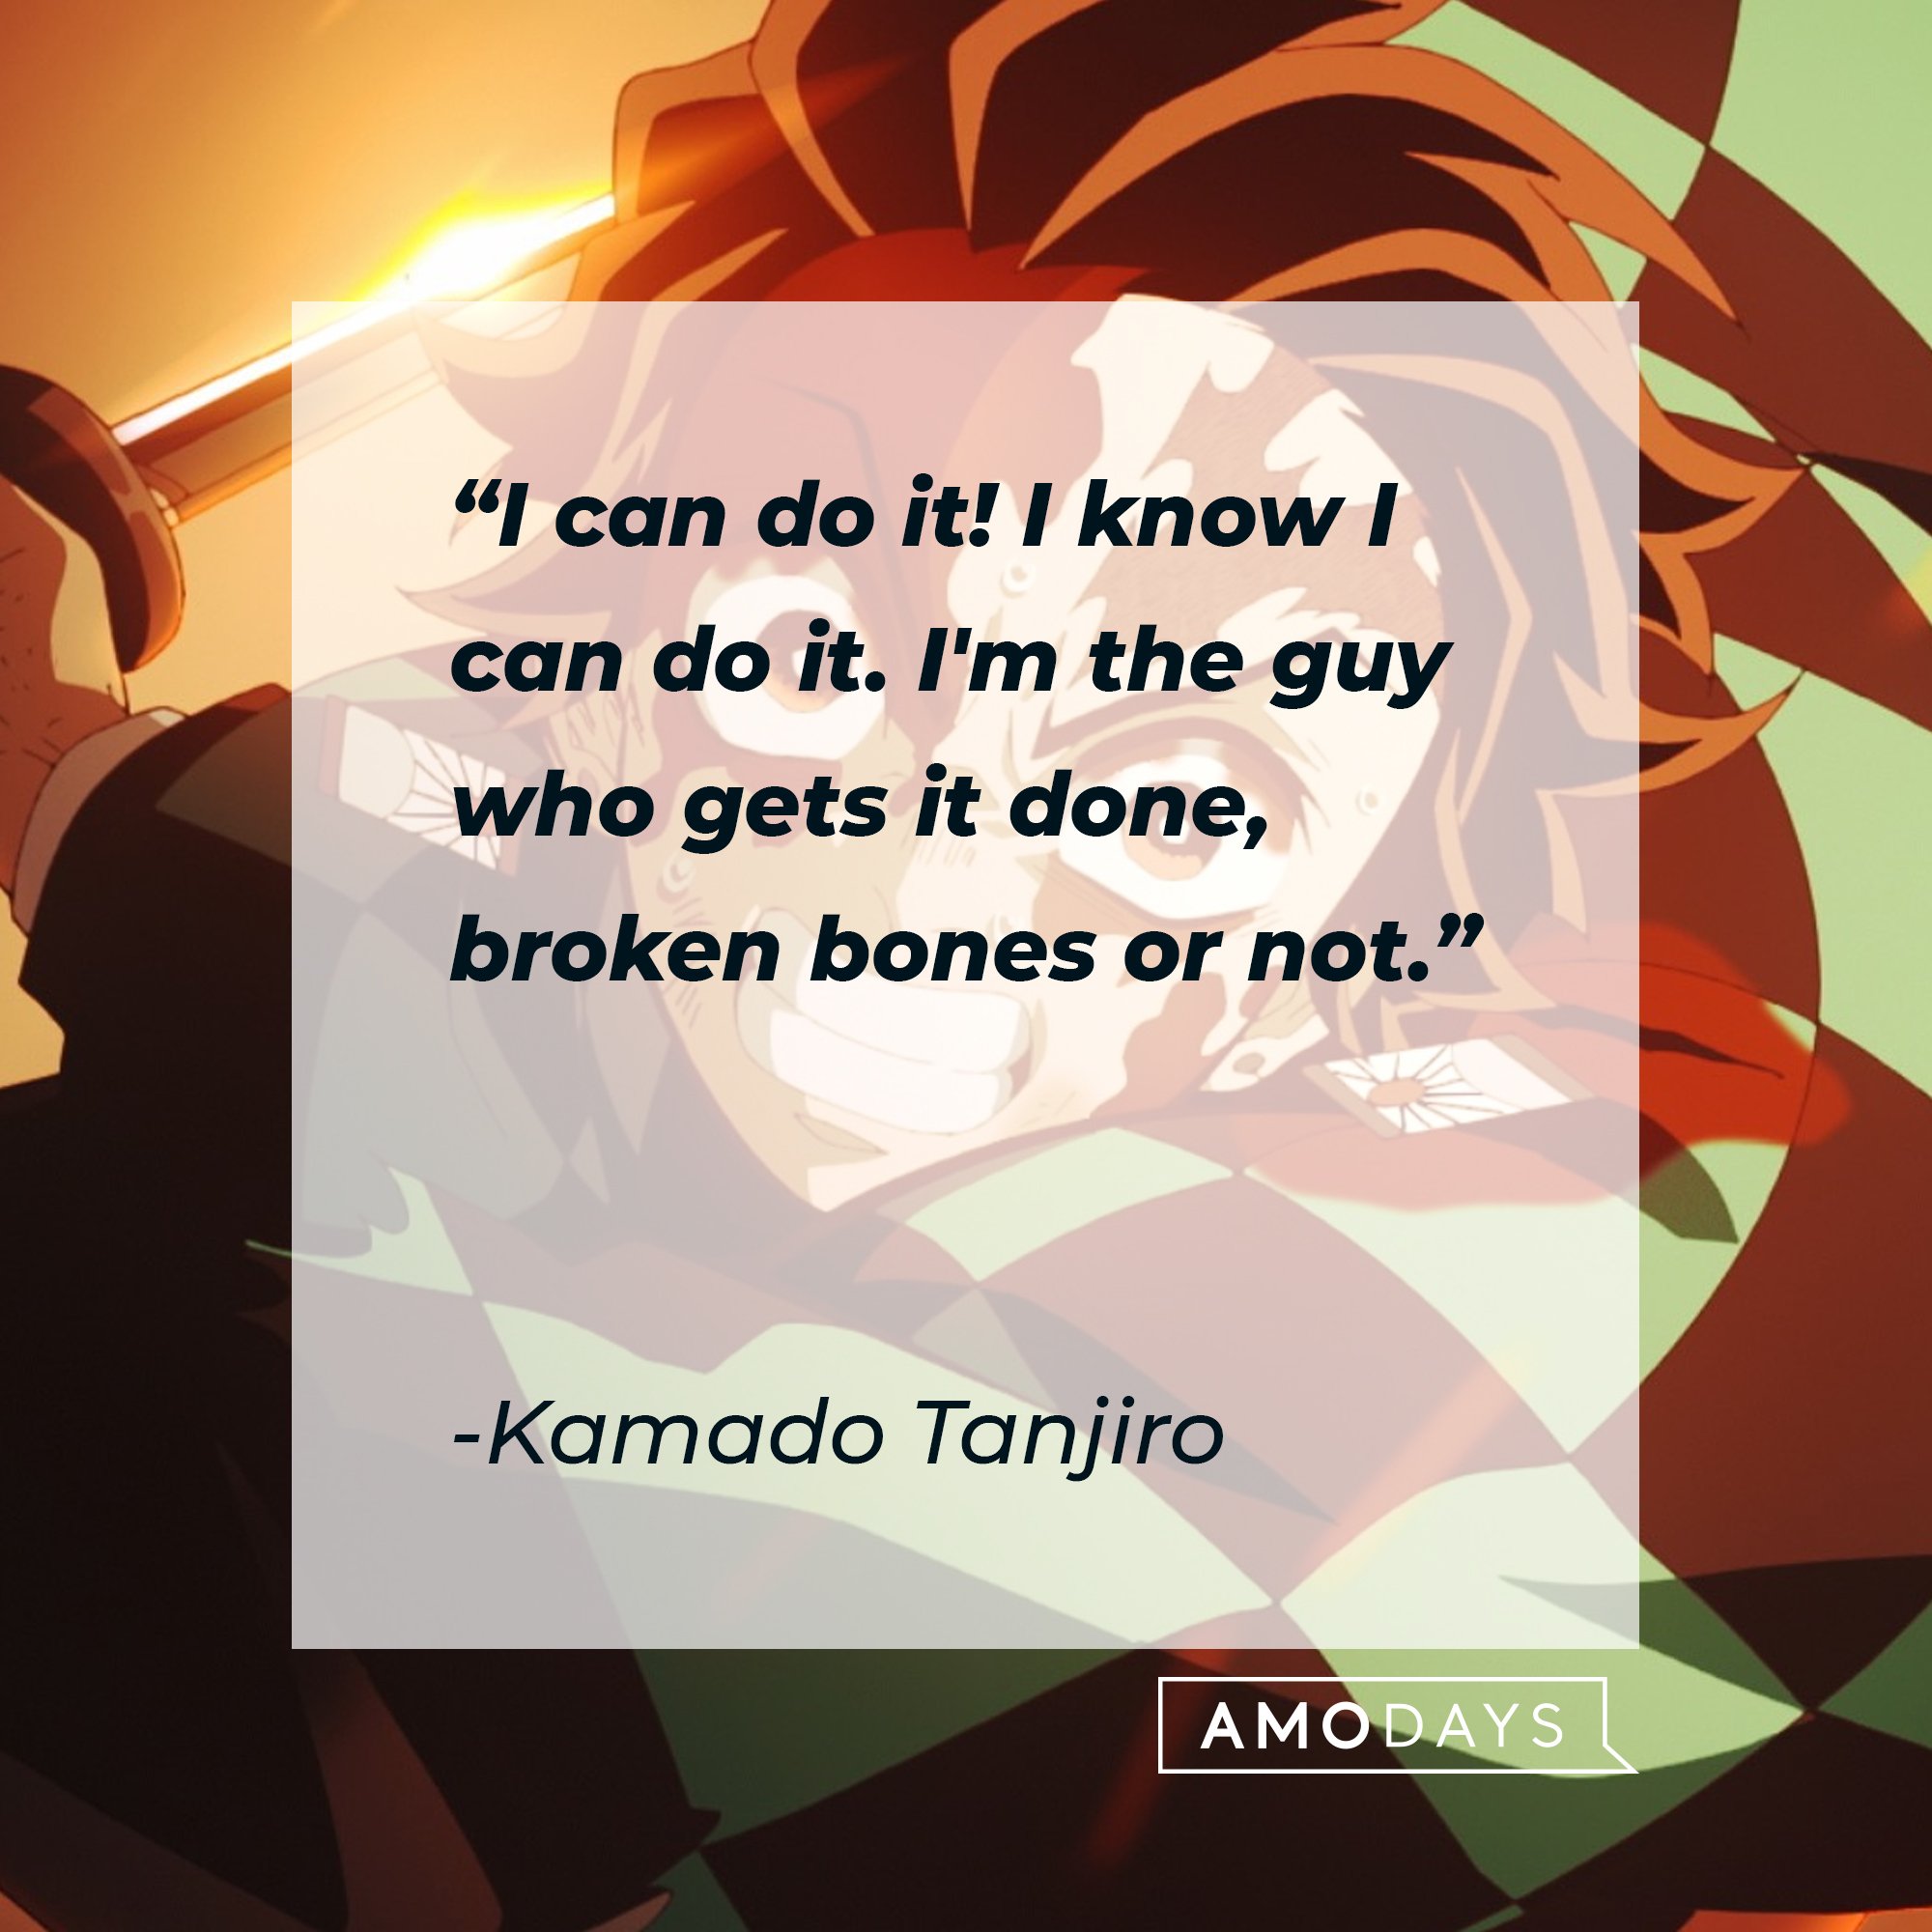 Kamado Tanjiro’s quote: "I can do it! I know I can do it. I'm the guy who gets it done, broken bones or not." | Image: AmoDays